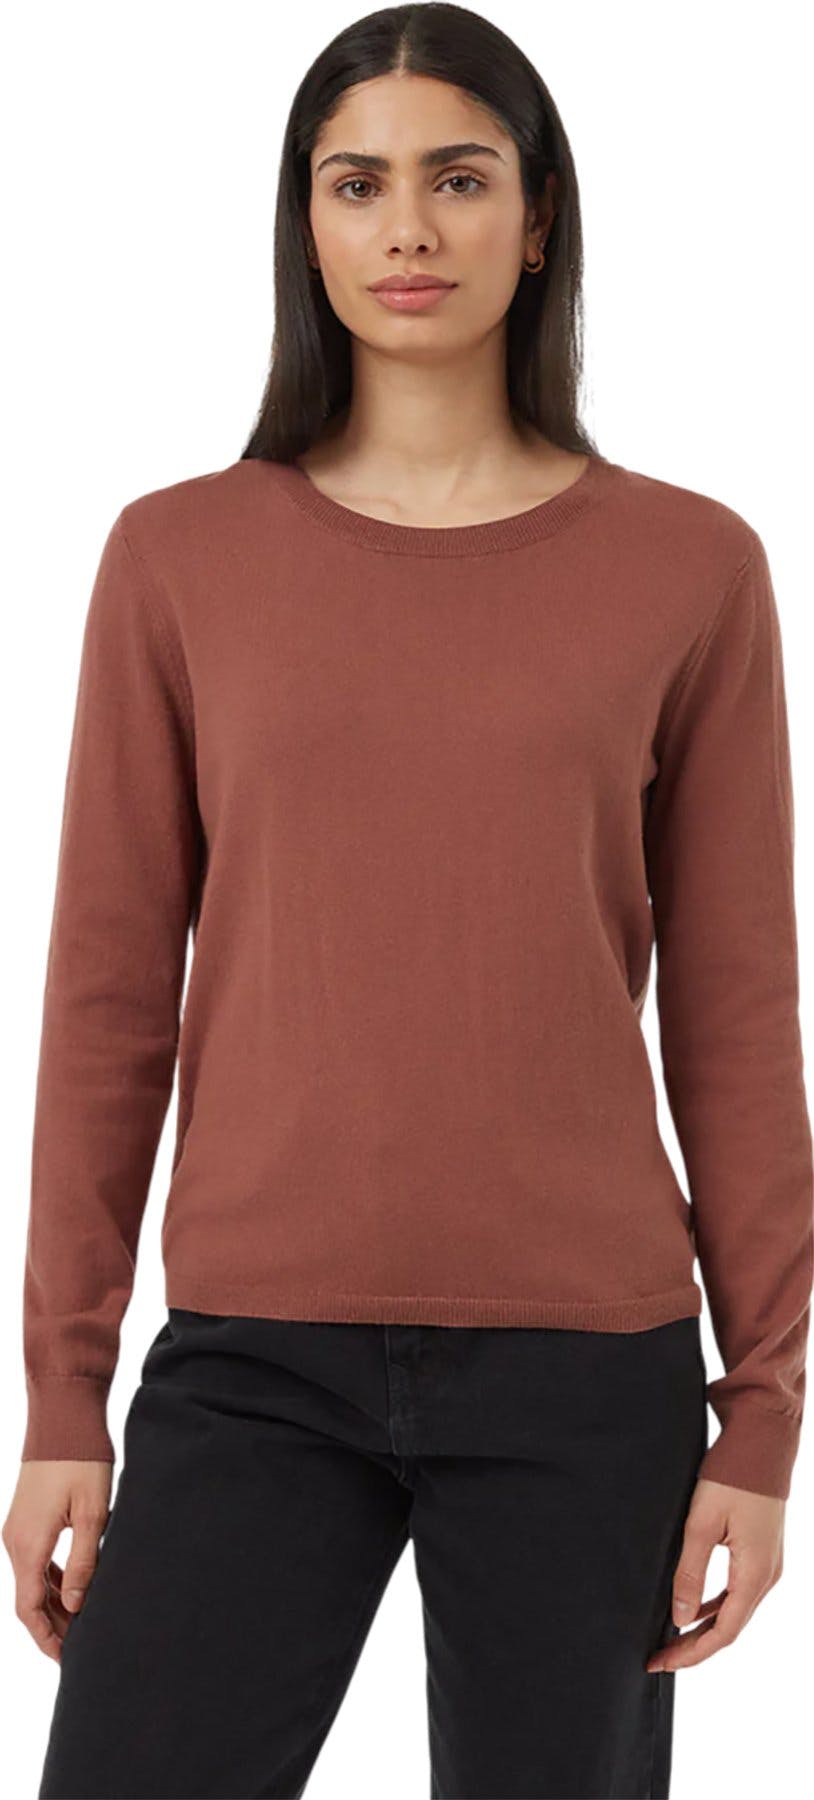 Product image for Highline Fine Gauge Sweater - Women's